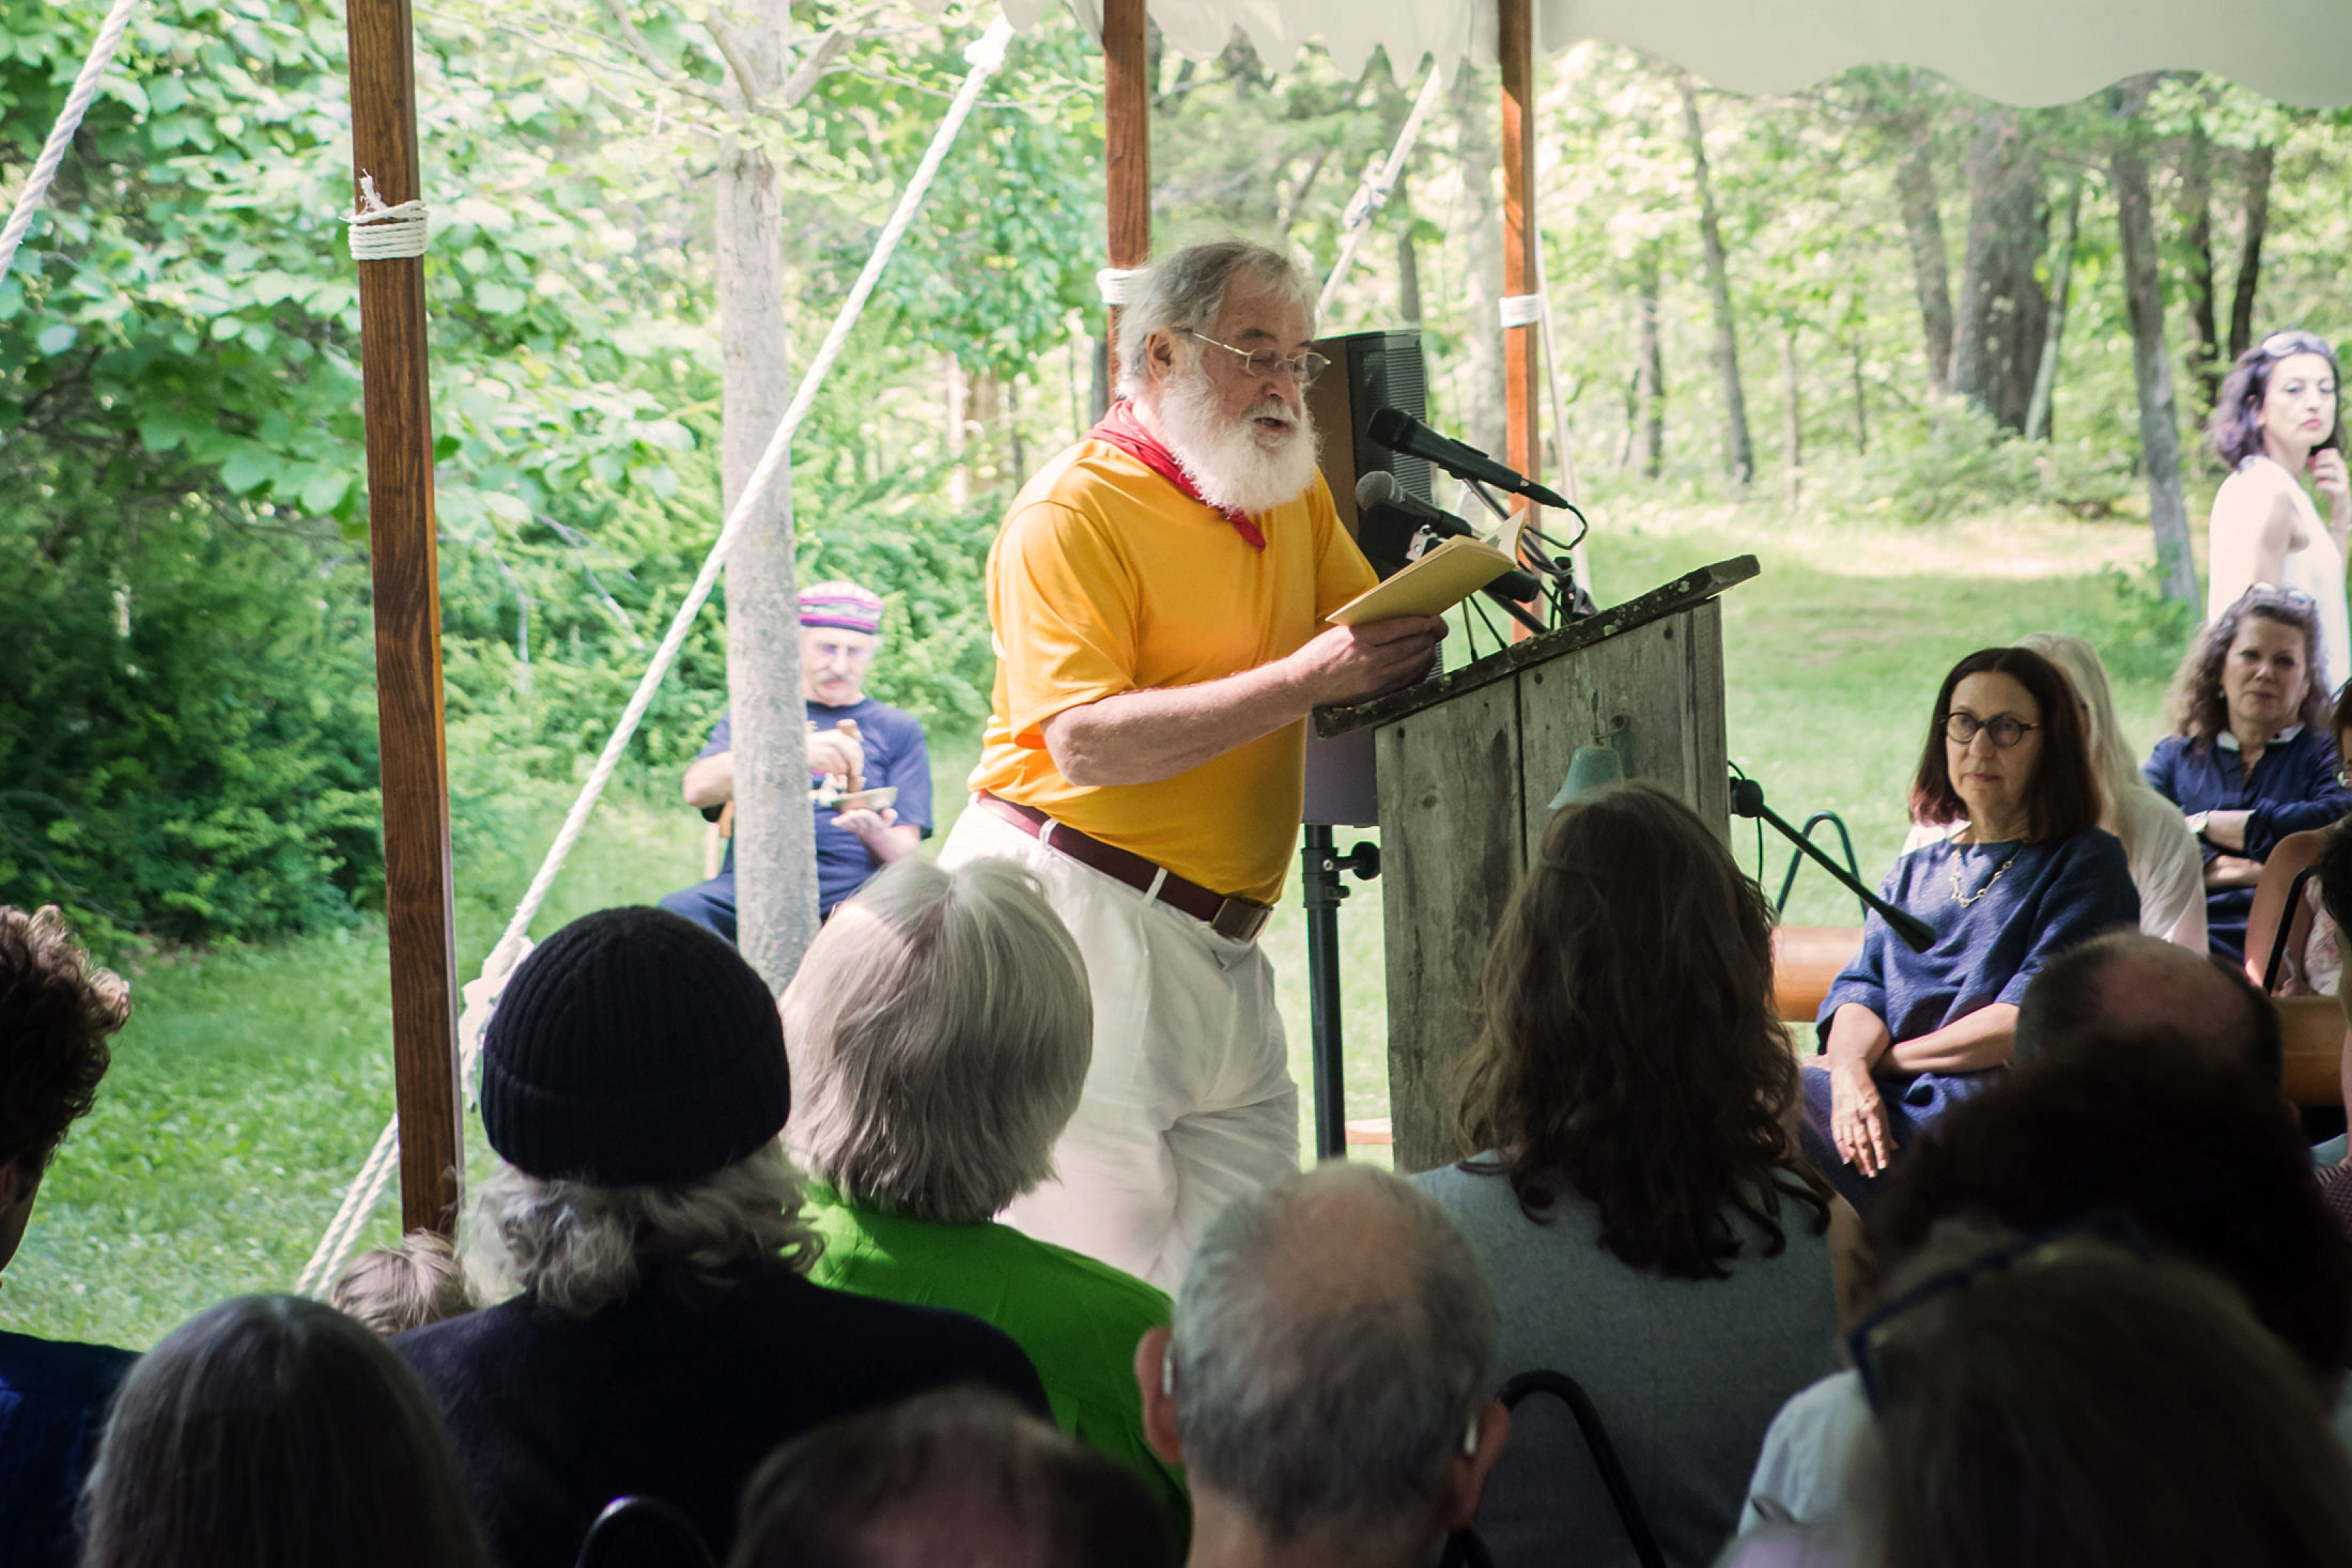 Bill Porter, who assumes the name Red Pine for his translations, read and sang his definitive translations of Hanshan’s poetry, The Collected Songs of Cold Mountain, at the June 2, 2019 opening of Brice Marden’s Cold Mountain Studies exhibition in a co-presentation first. Sounding the Space for singing bowls by composer Raphael Mostel accompanied the reading.